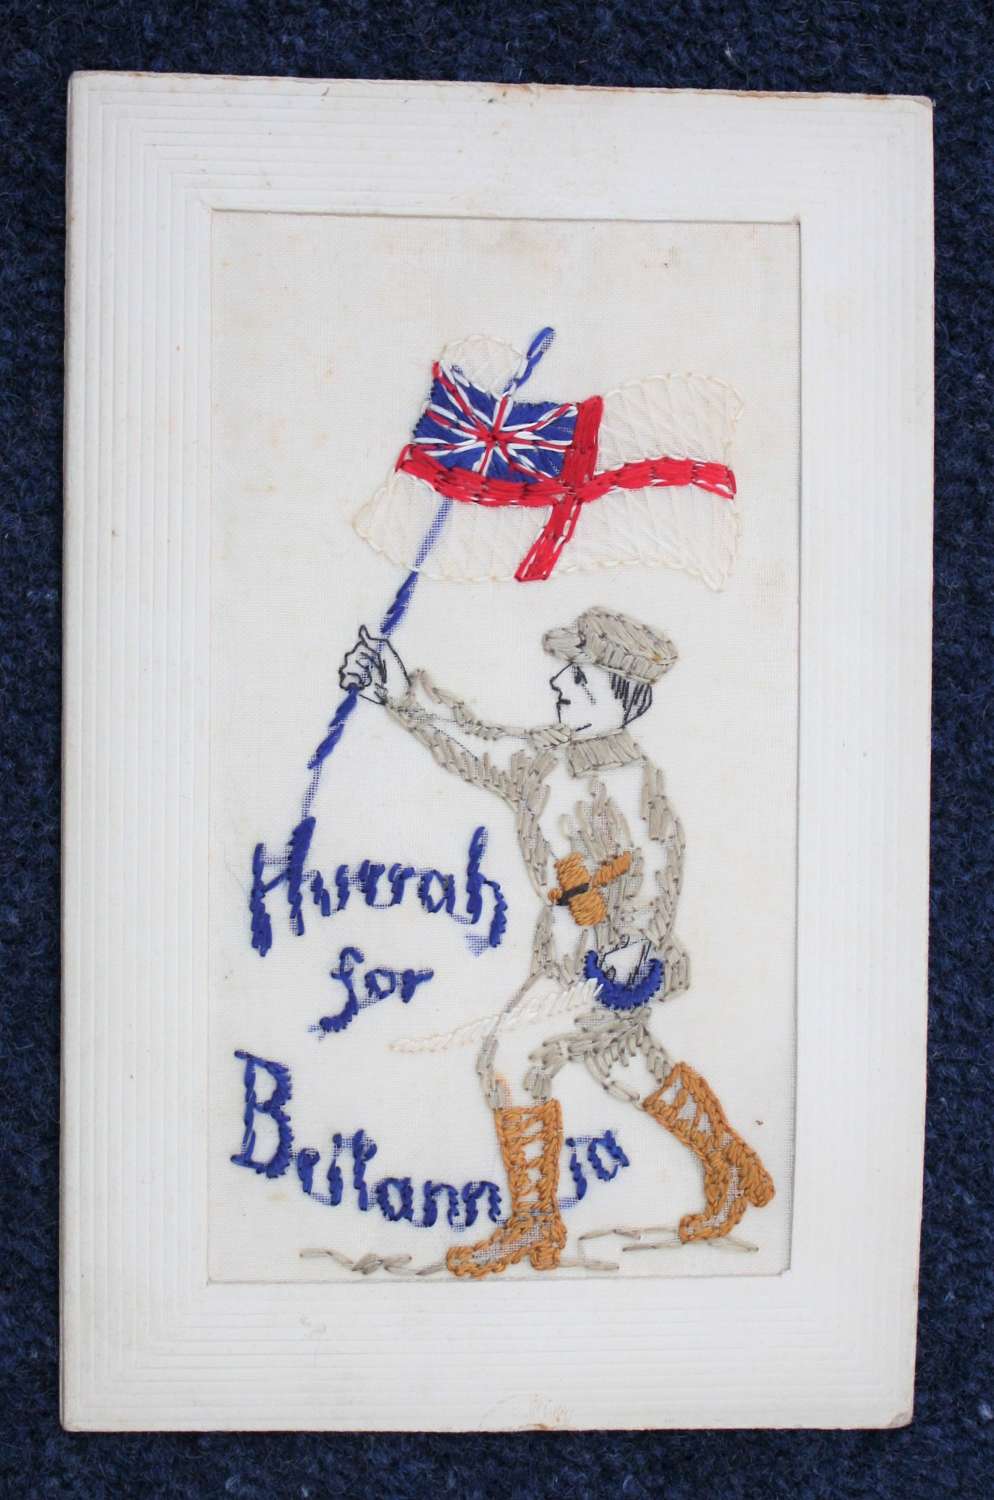 WW1 Embroidered Silk Postcard of a British Royal Marine officer.